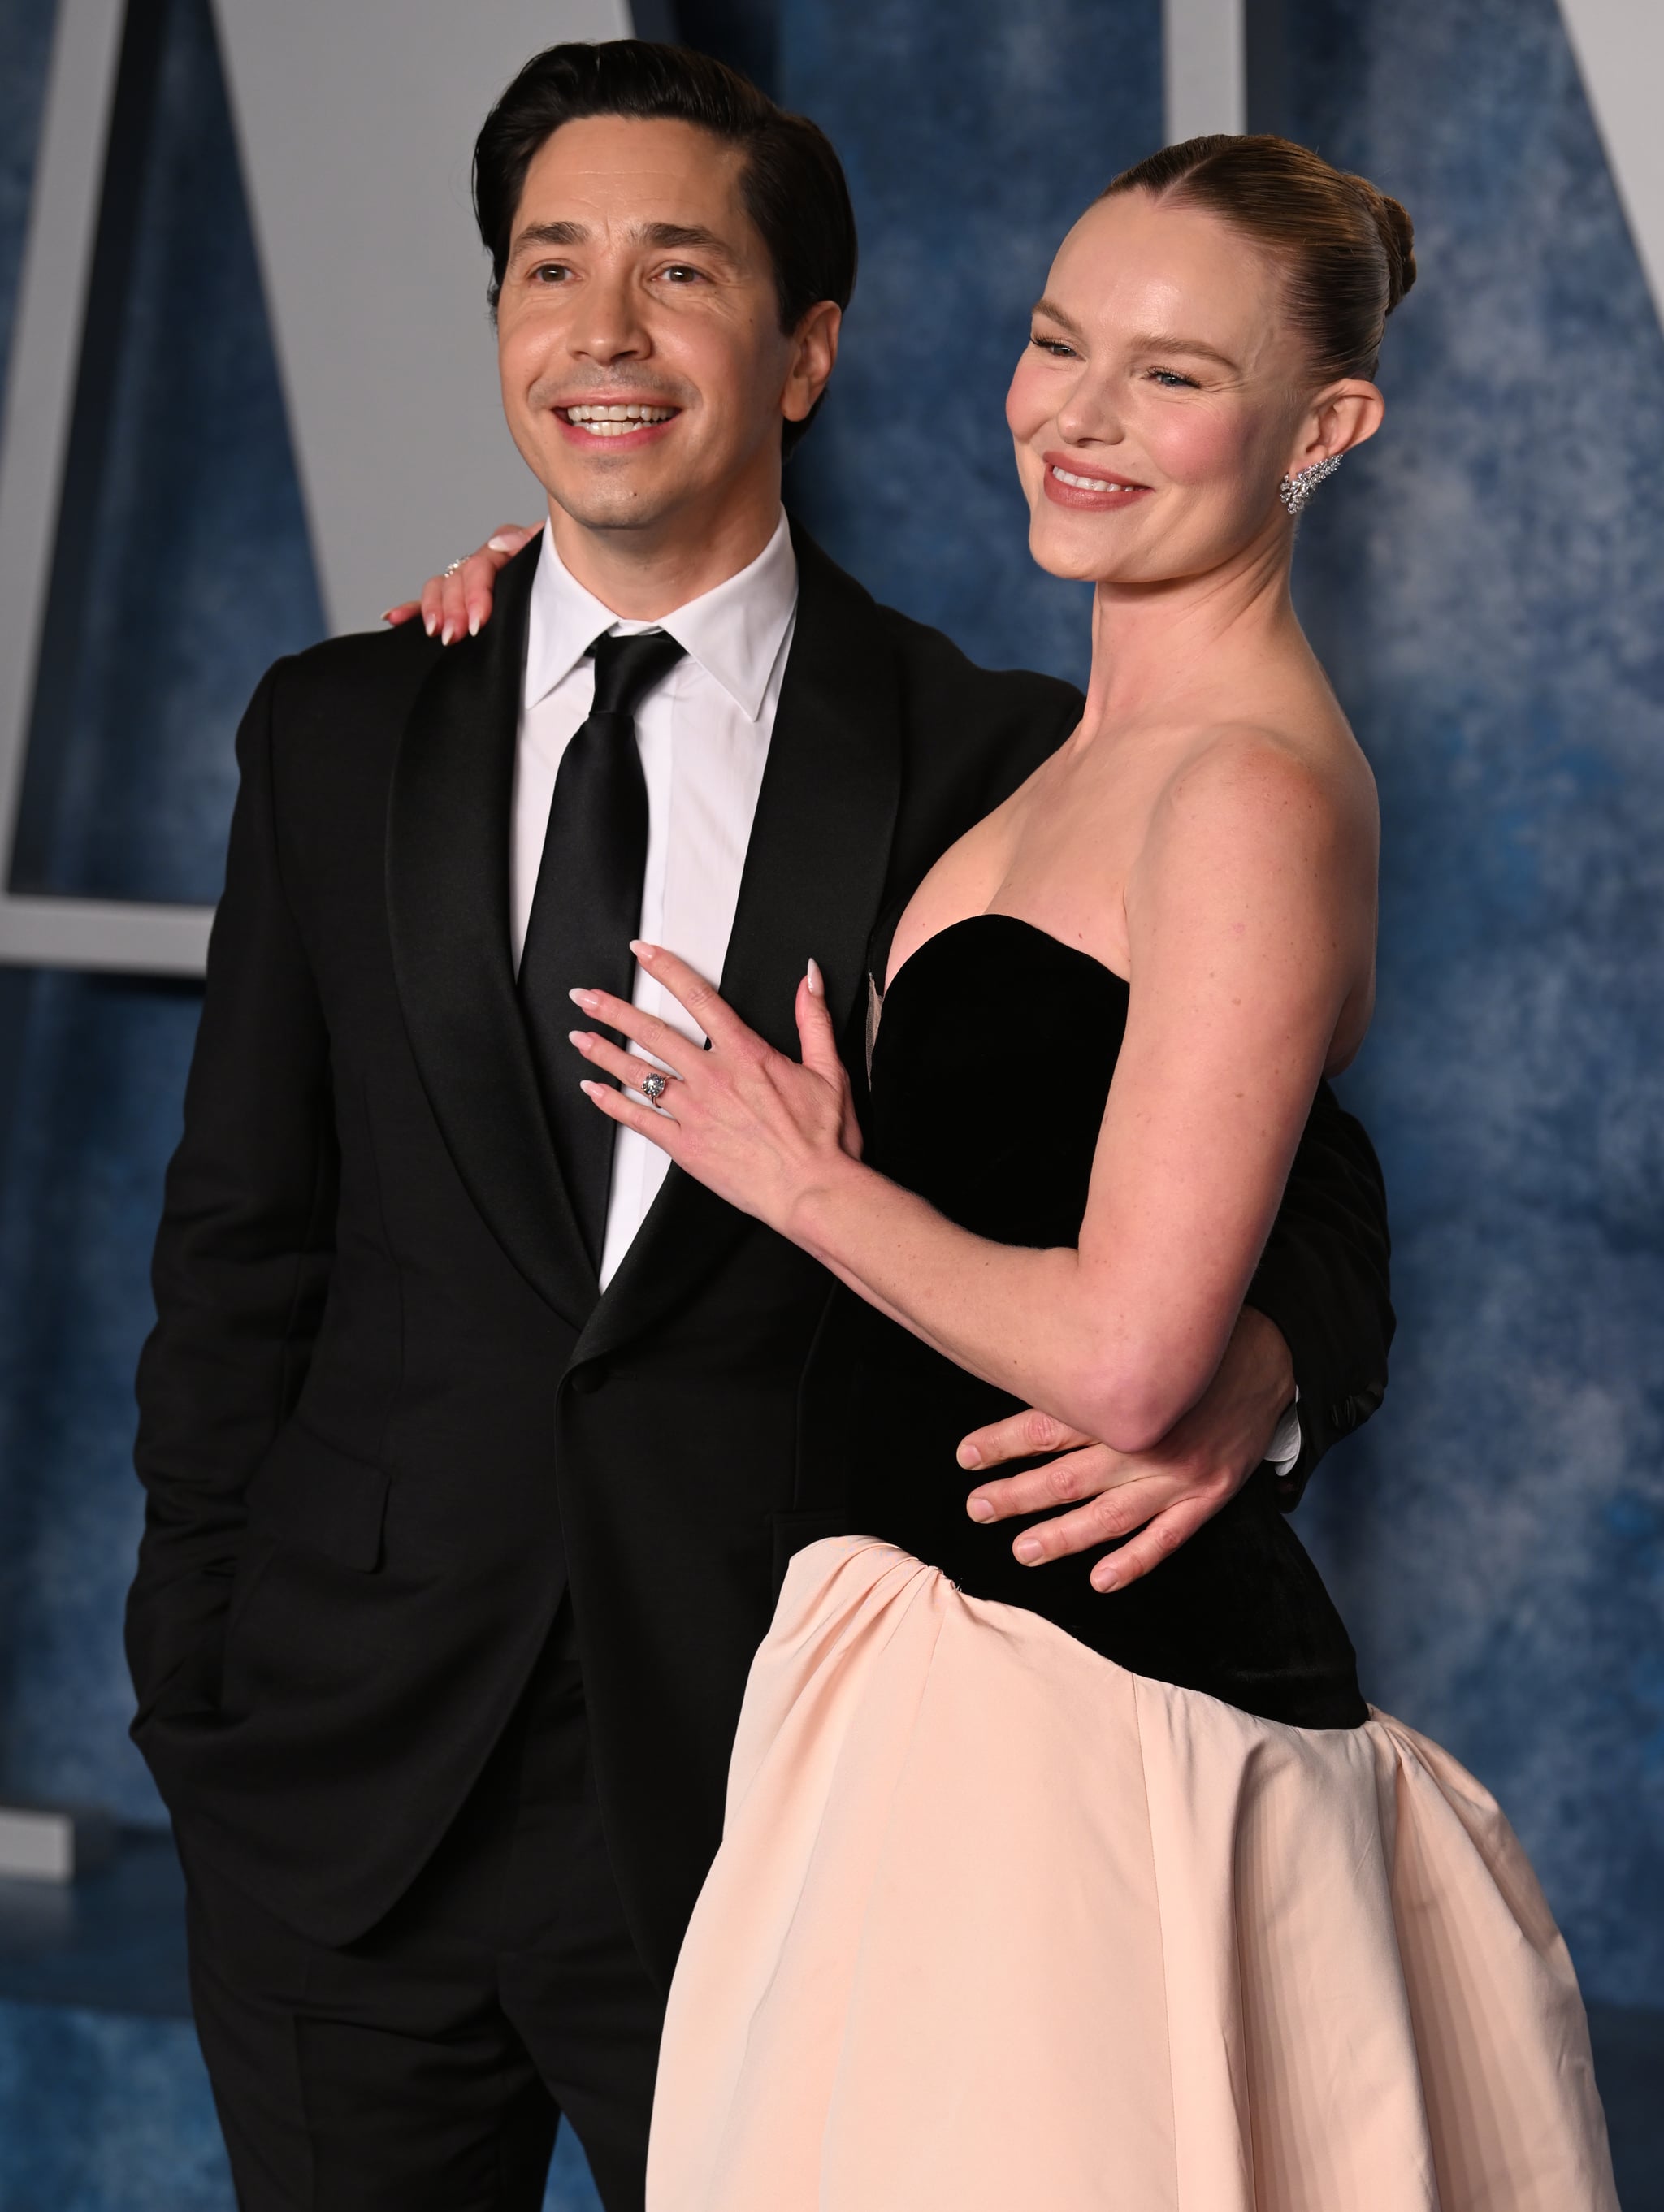 Justin Long and Kate Bosworth attending the Vanity Fair Oscar Party held at the Wallis Annenberg Centre for the Performing Arts in Beverly Hills, Los Angeles, California, USA. Picture date: Sunday March 12, 2023. (Photo by Doug Peters/PA Images via Getty Images)